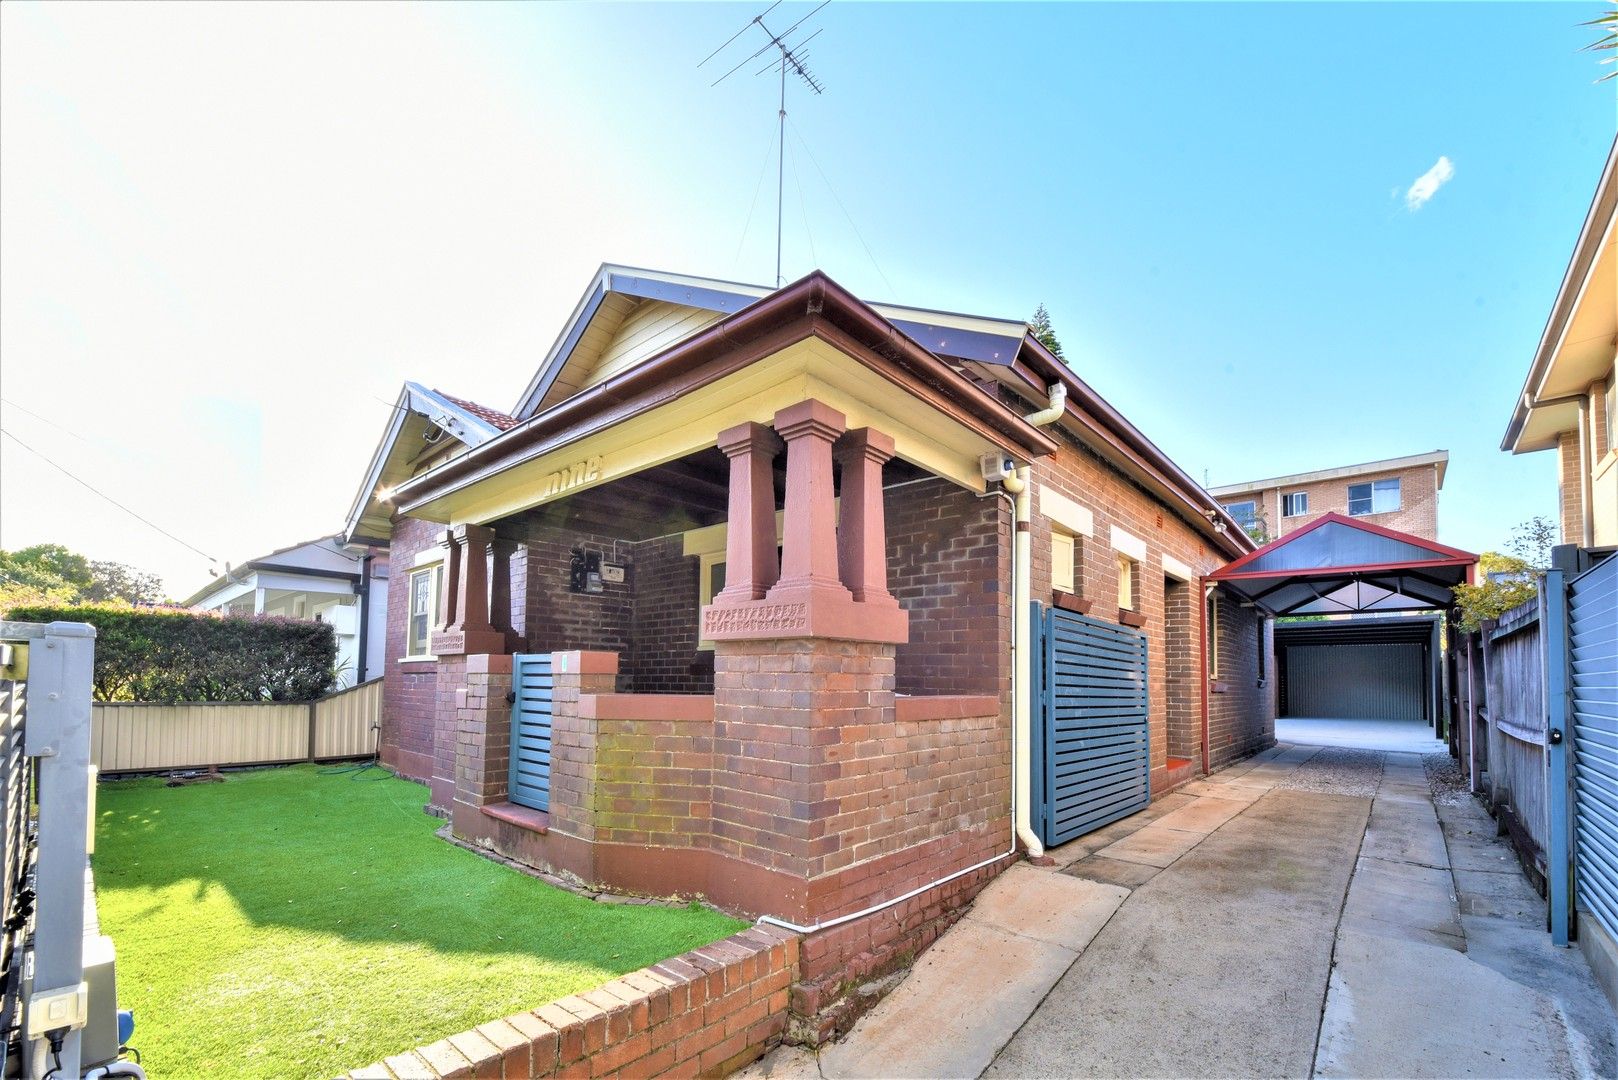 3 bedrooms House in 9 Lever Street ROSEBERY NSW, 2018